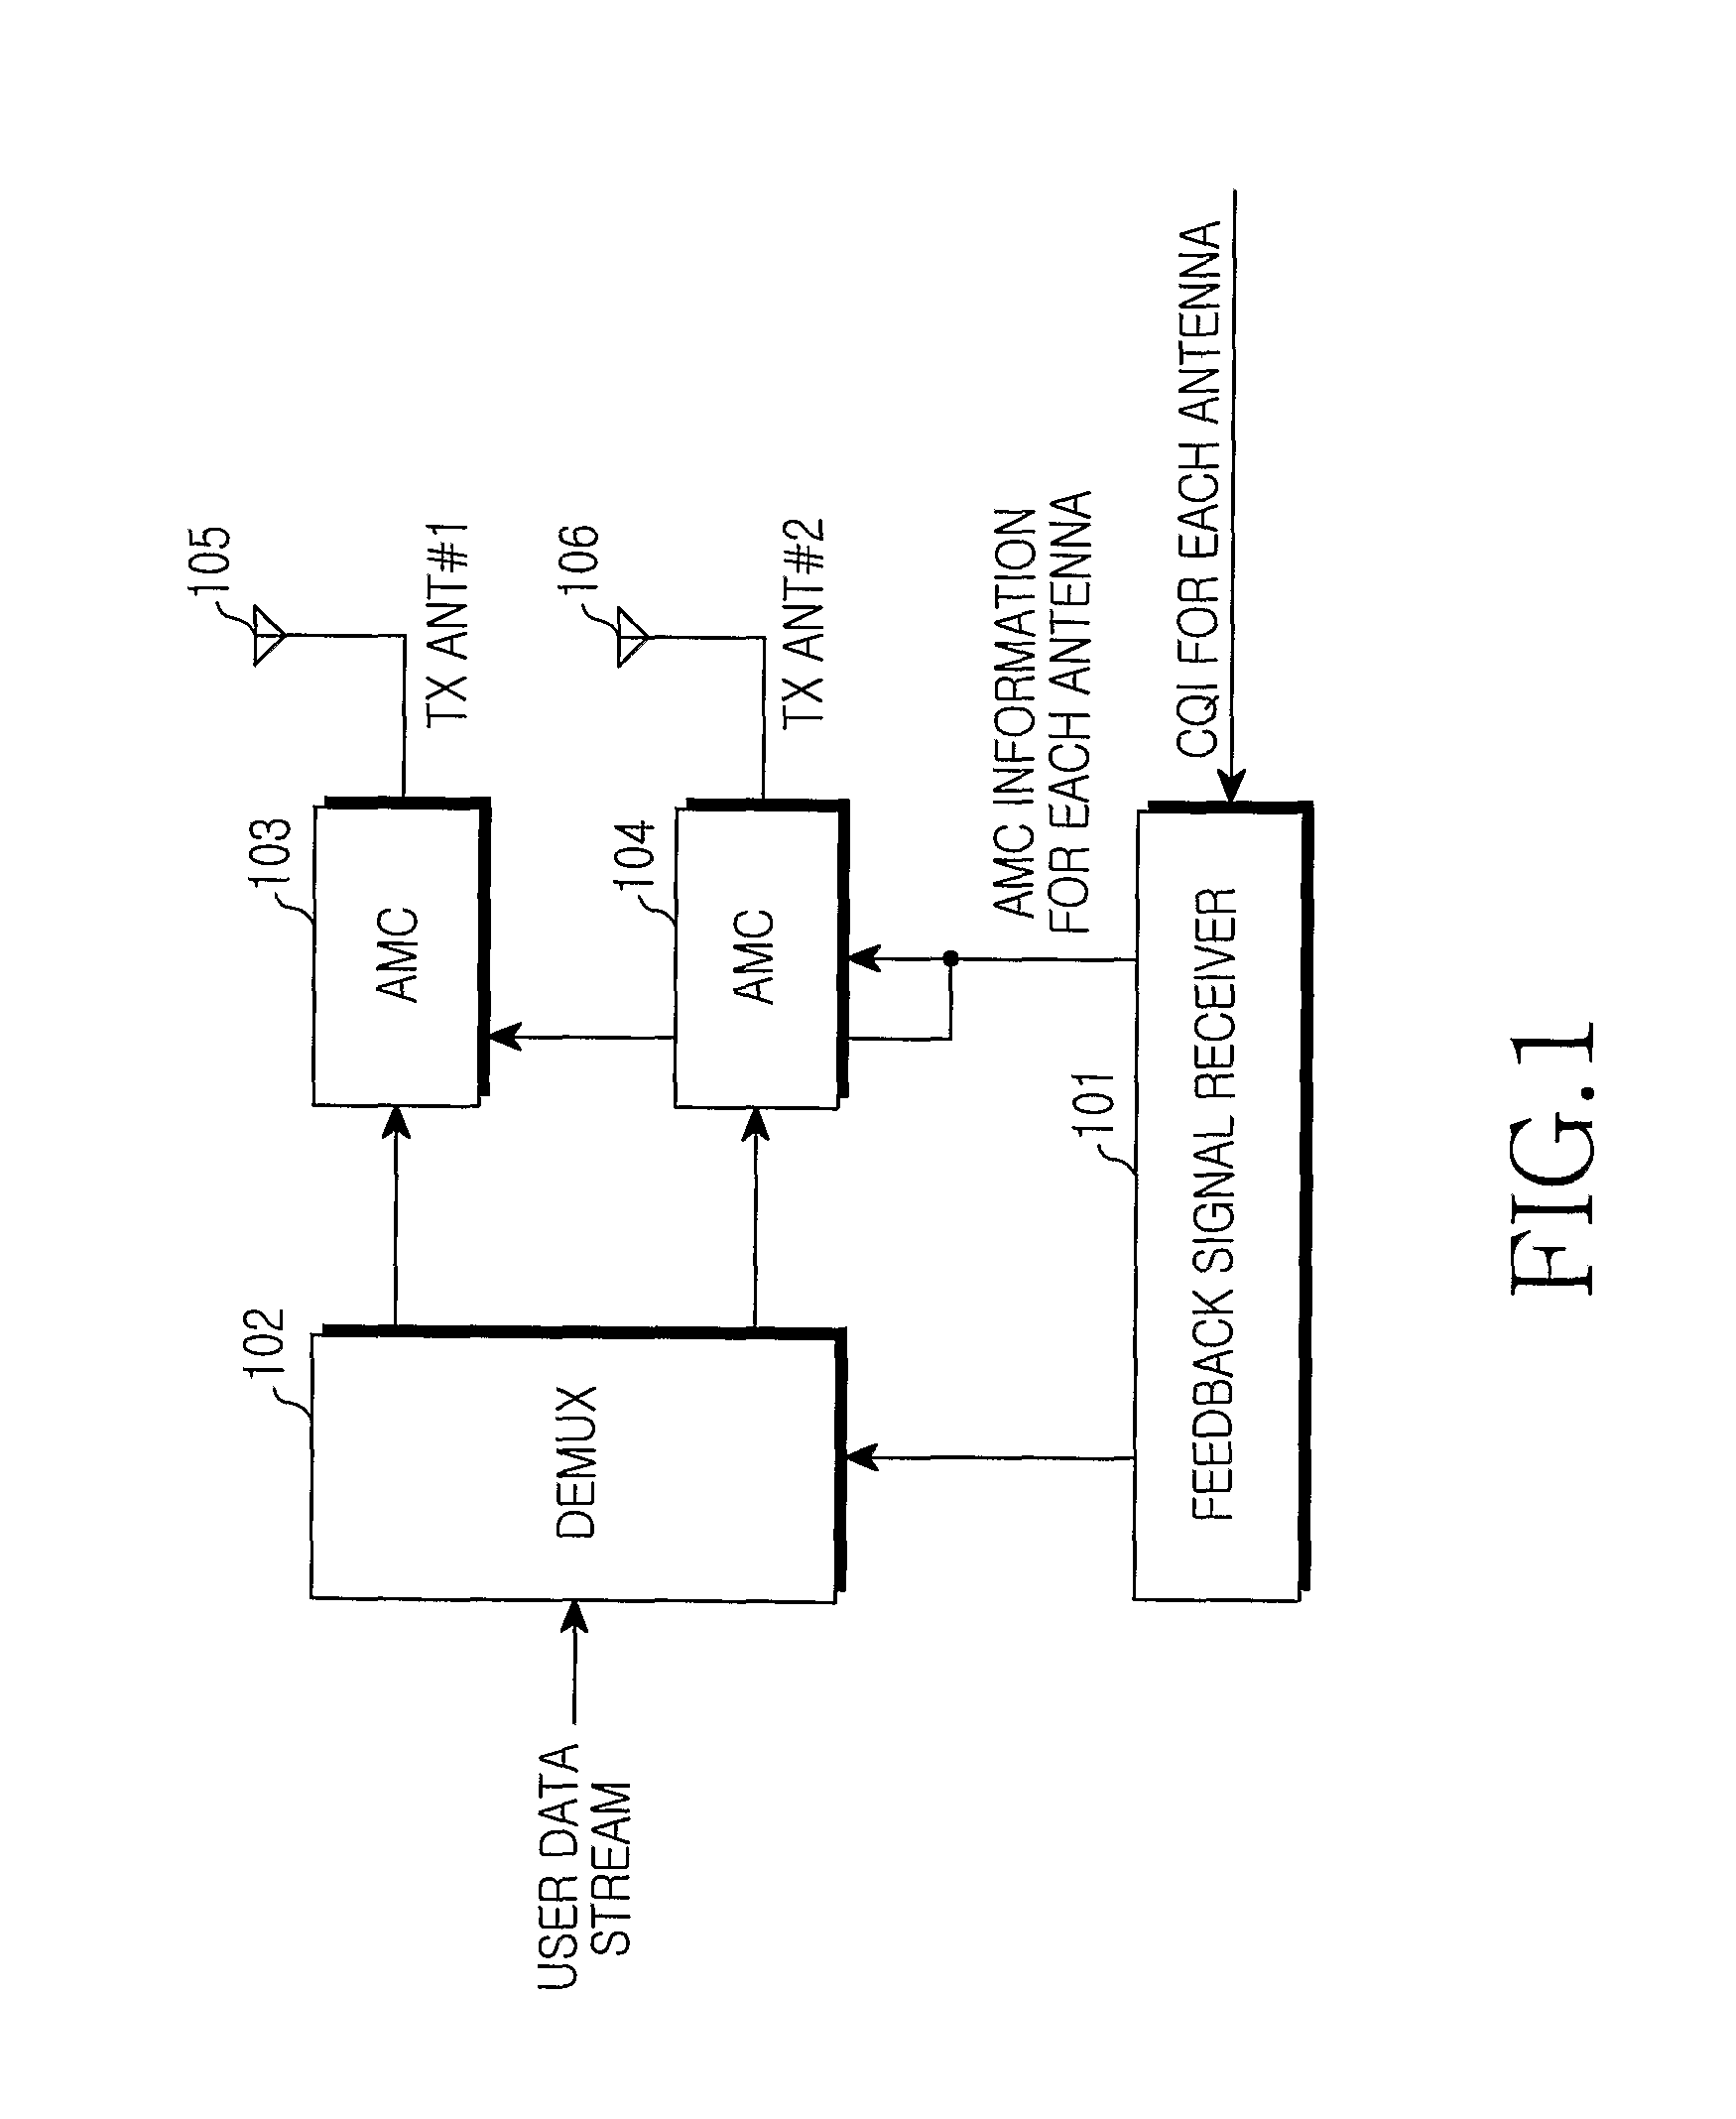 Apparatus and Method for Transmitting and Receiving Packet Data Using Multiple Antennas in a Wireless Communication System